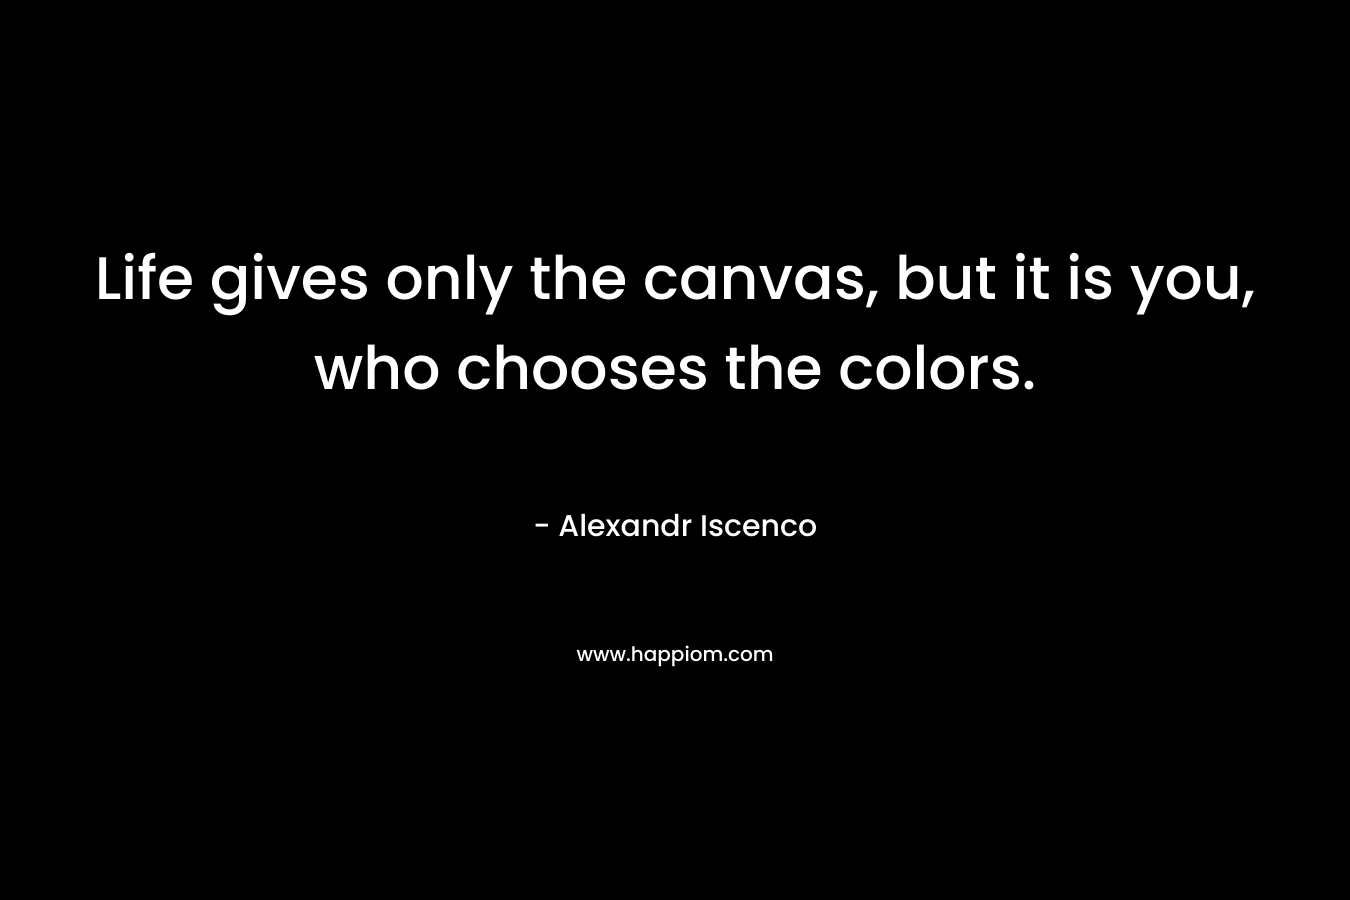 Life gives only the canvas, but it is you, who chooses the colors. – Alexandr Iscenco